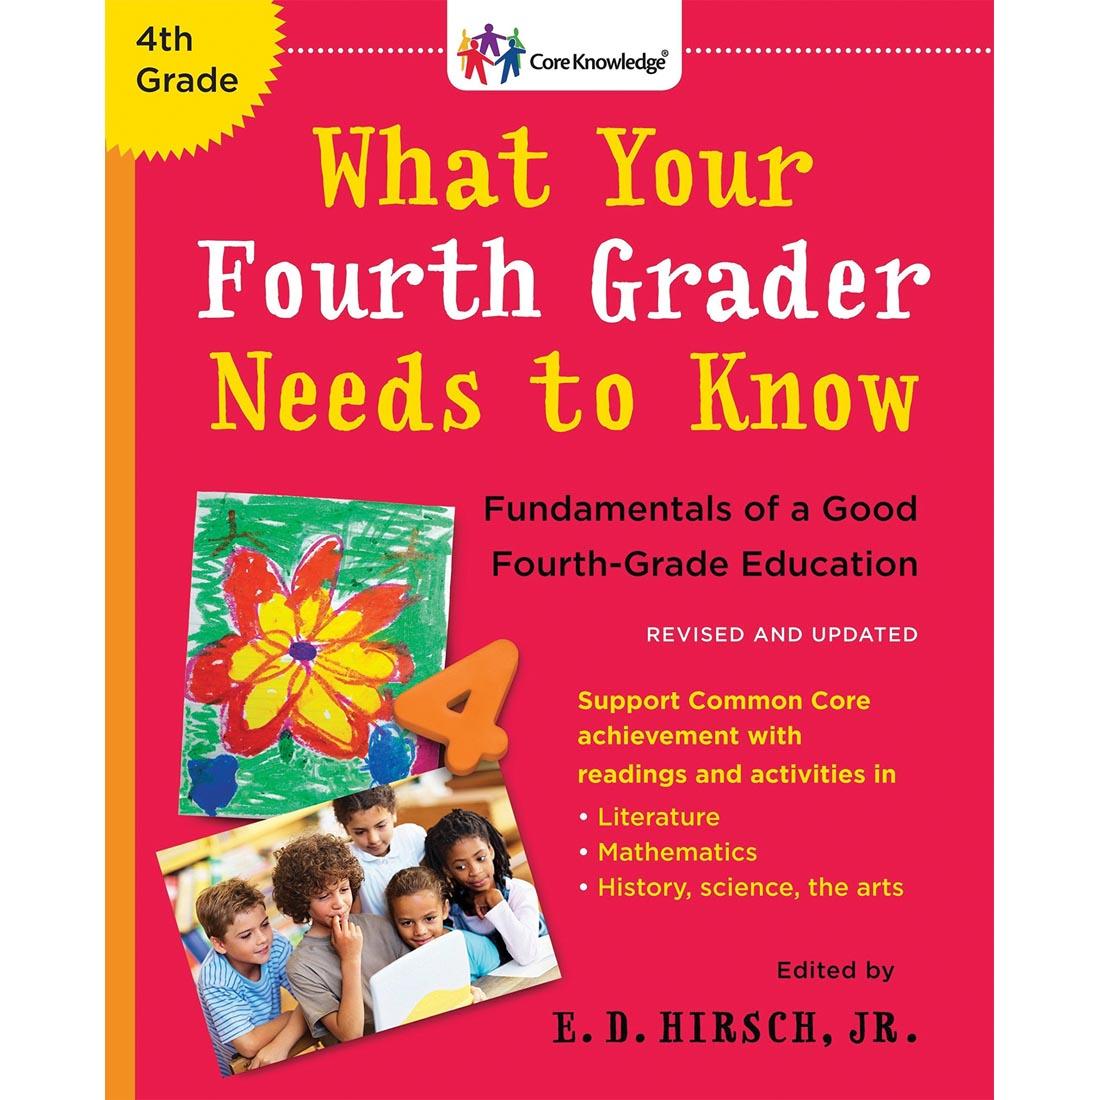 What Your Fourth Grader Needs To Know